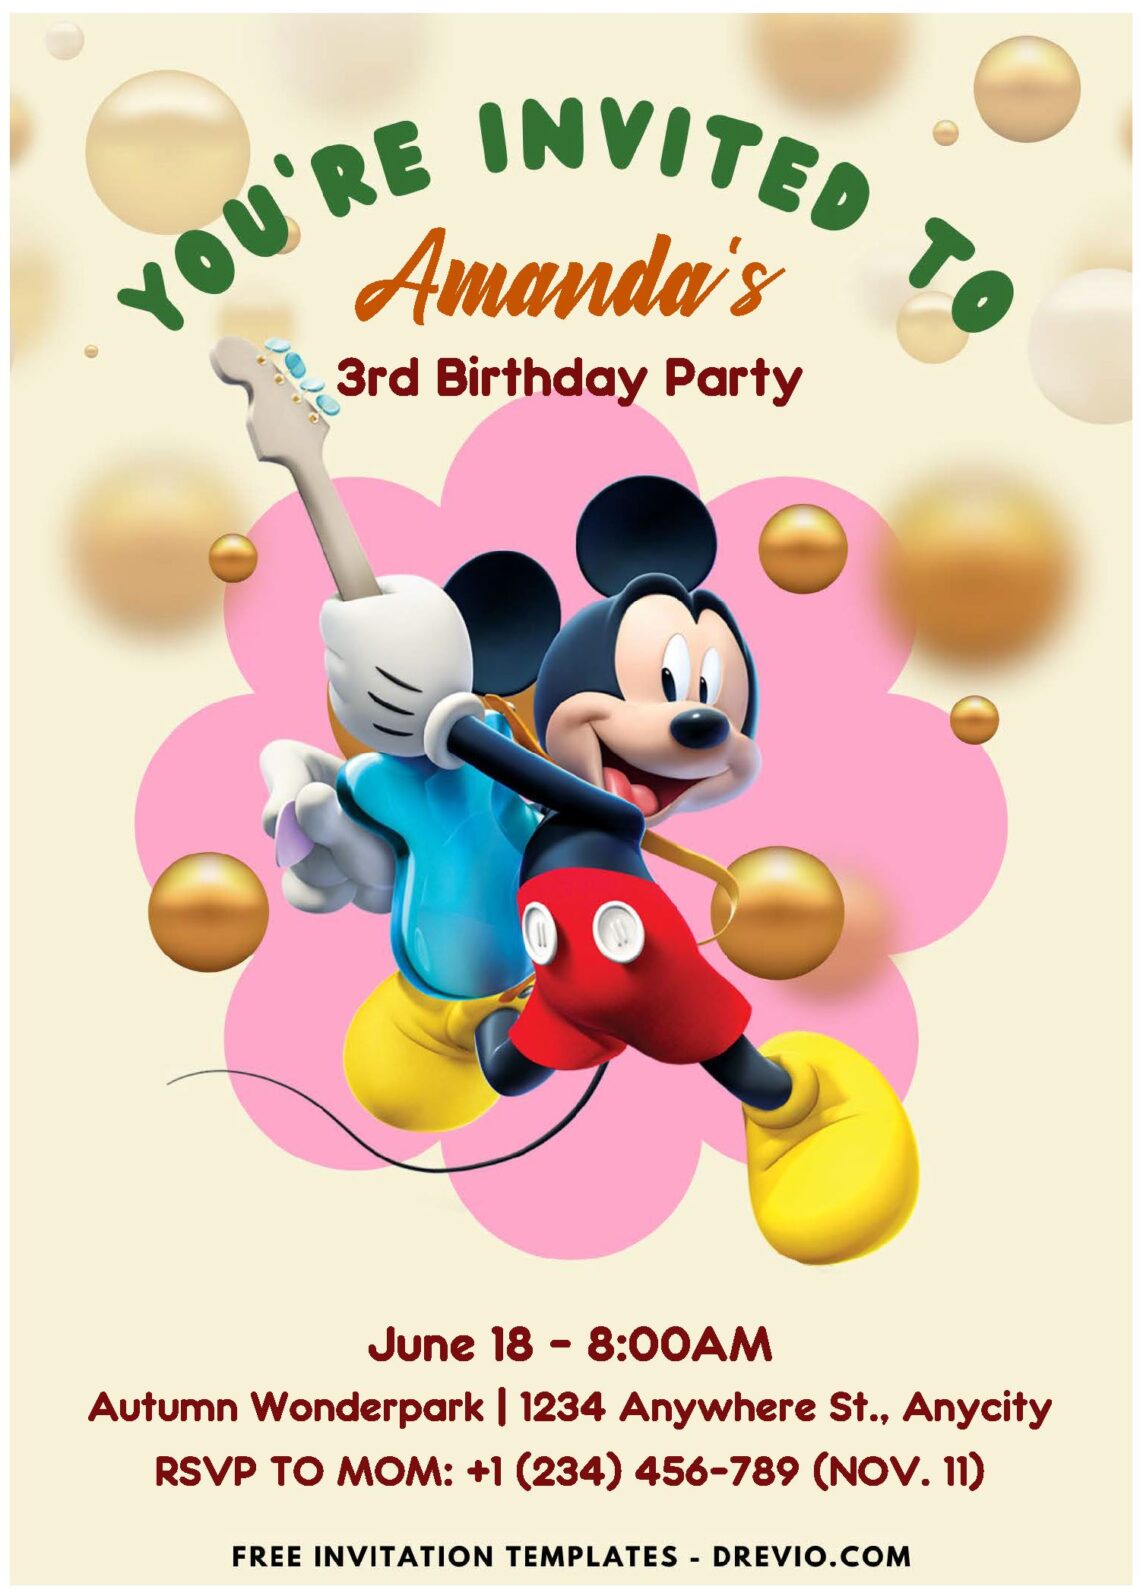 Mickey Mouse Invitation Templates For Fun And Enjoyable Kids' Parties E